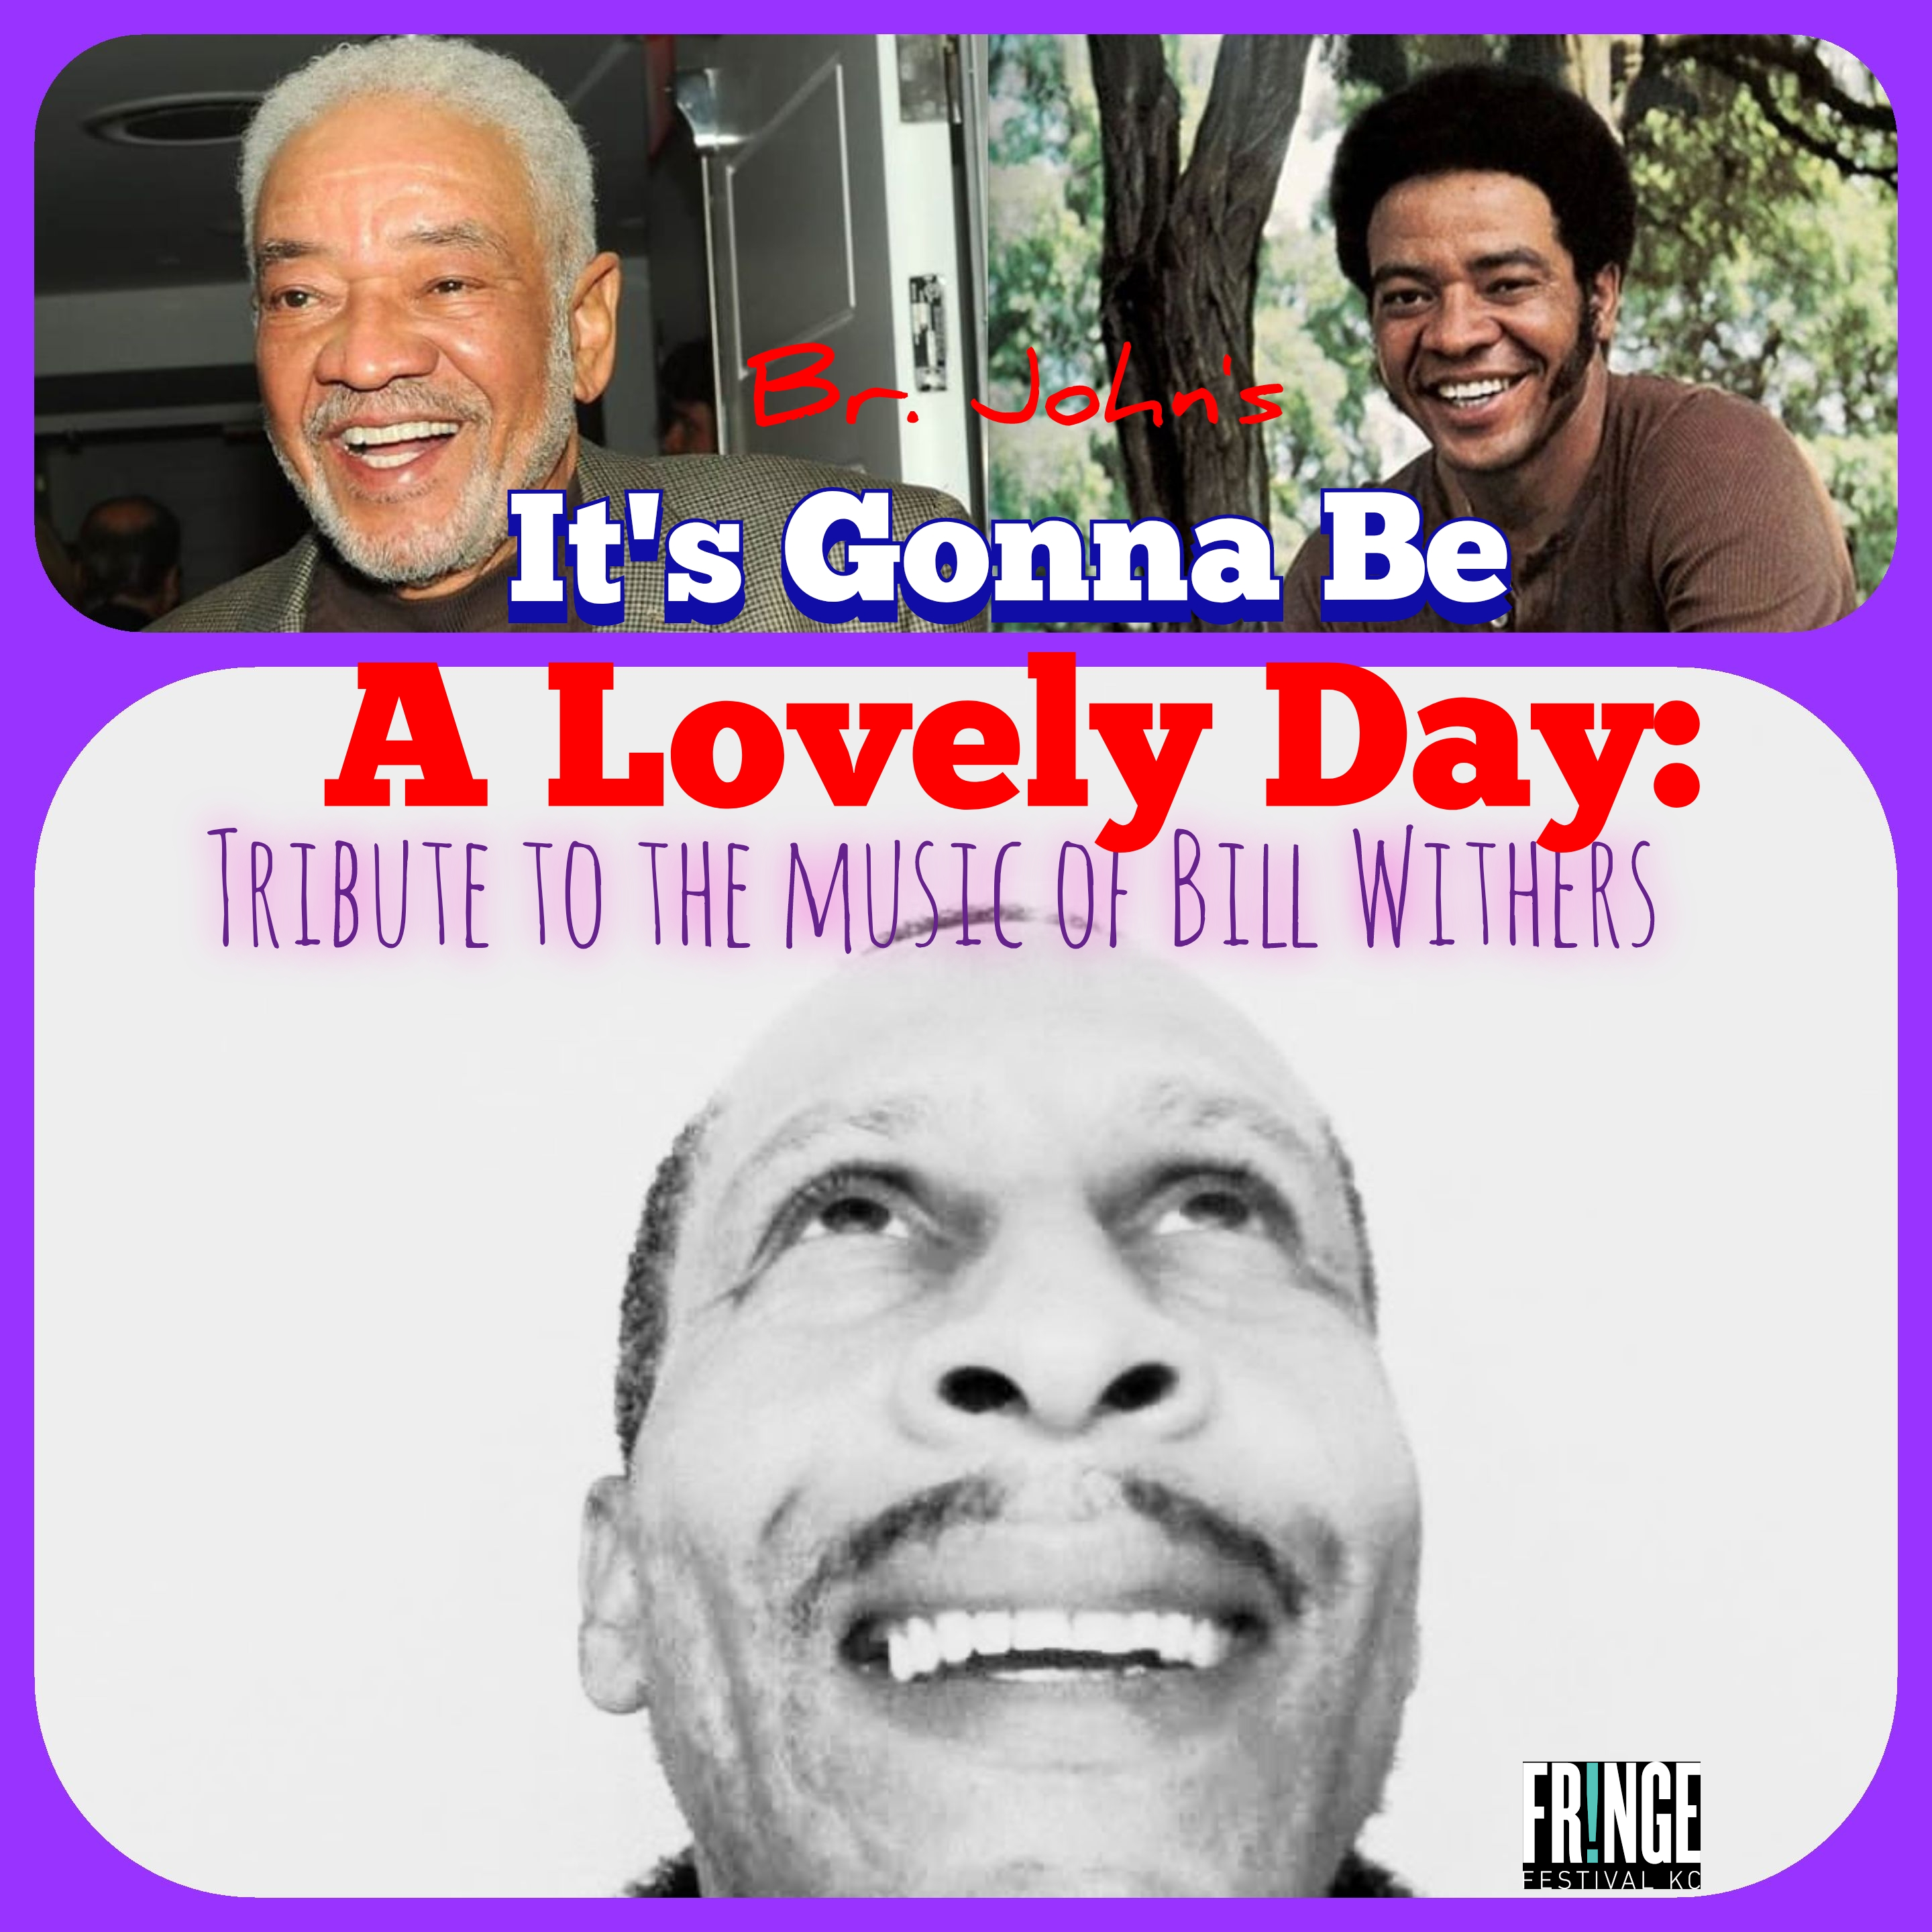 2338-Gonna Be A Lovely Day Tribute To Bill Withers - Br. John Rajpa